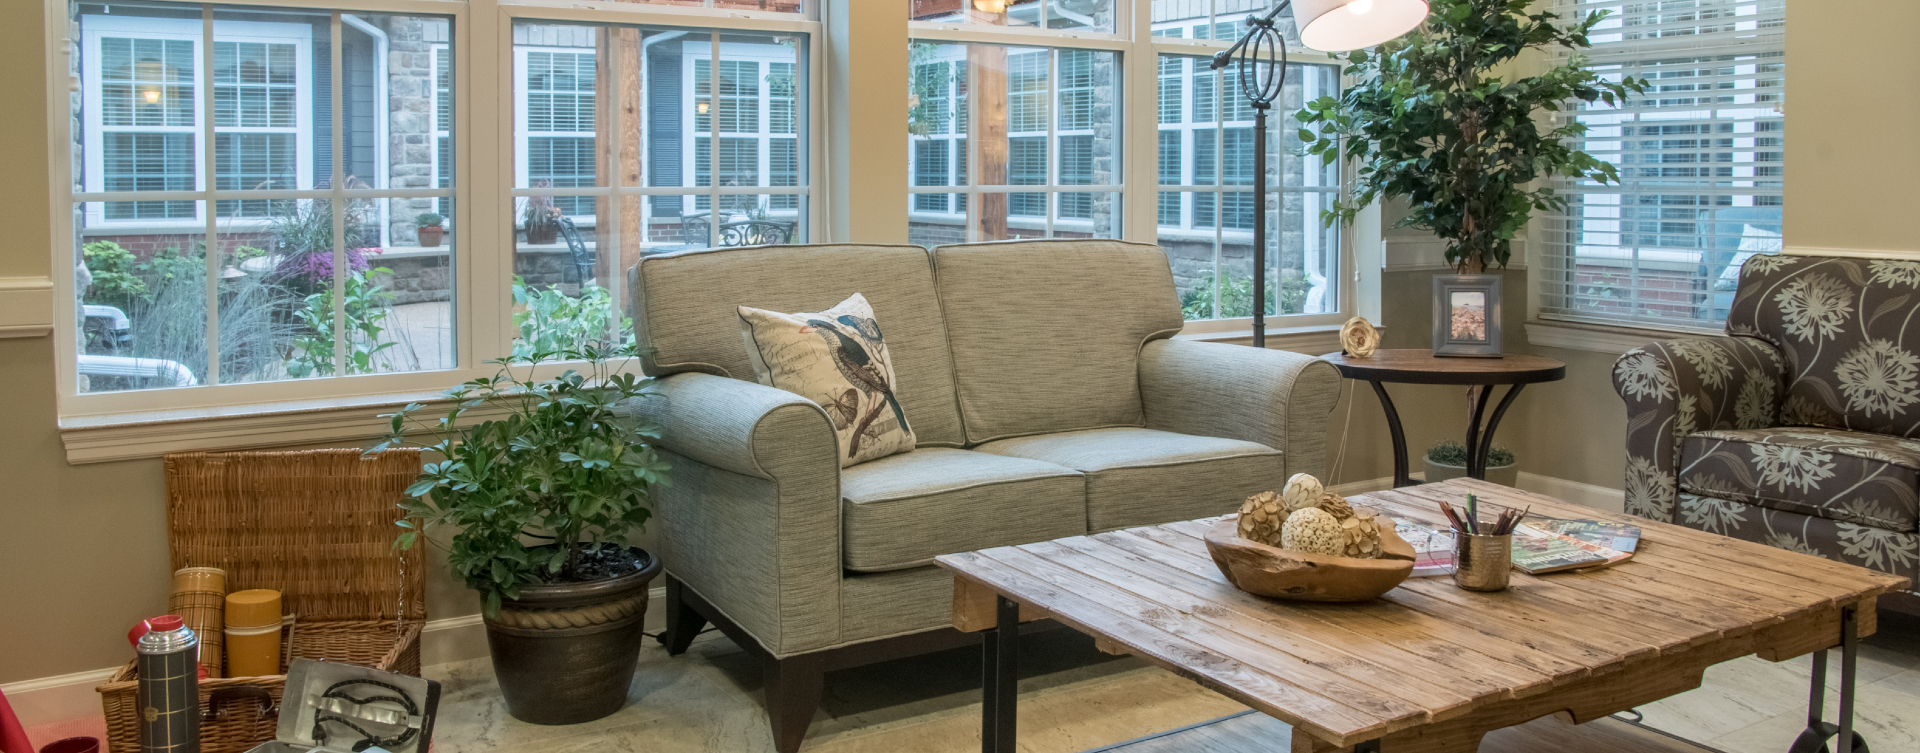 Curl up with a good book in the sunroom at Bickford of Spotsylvania